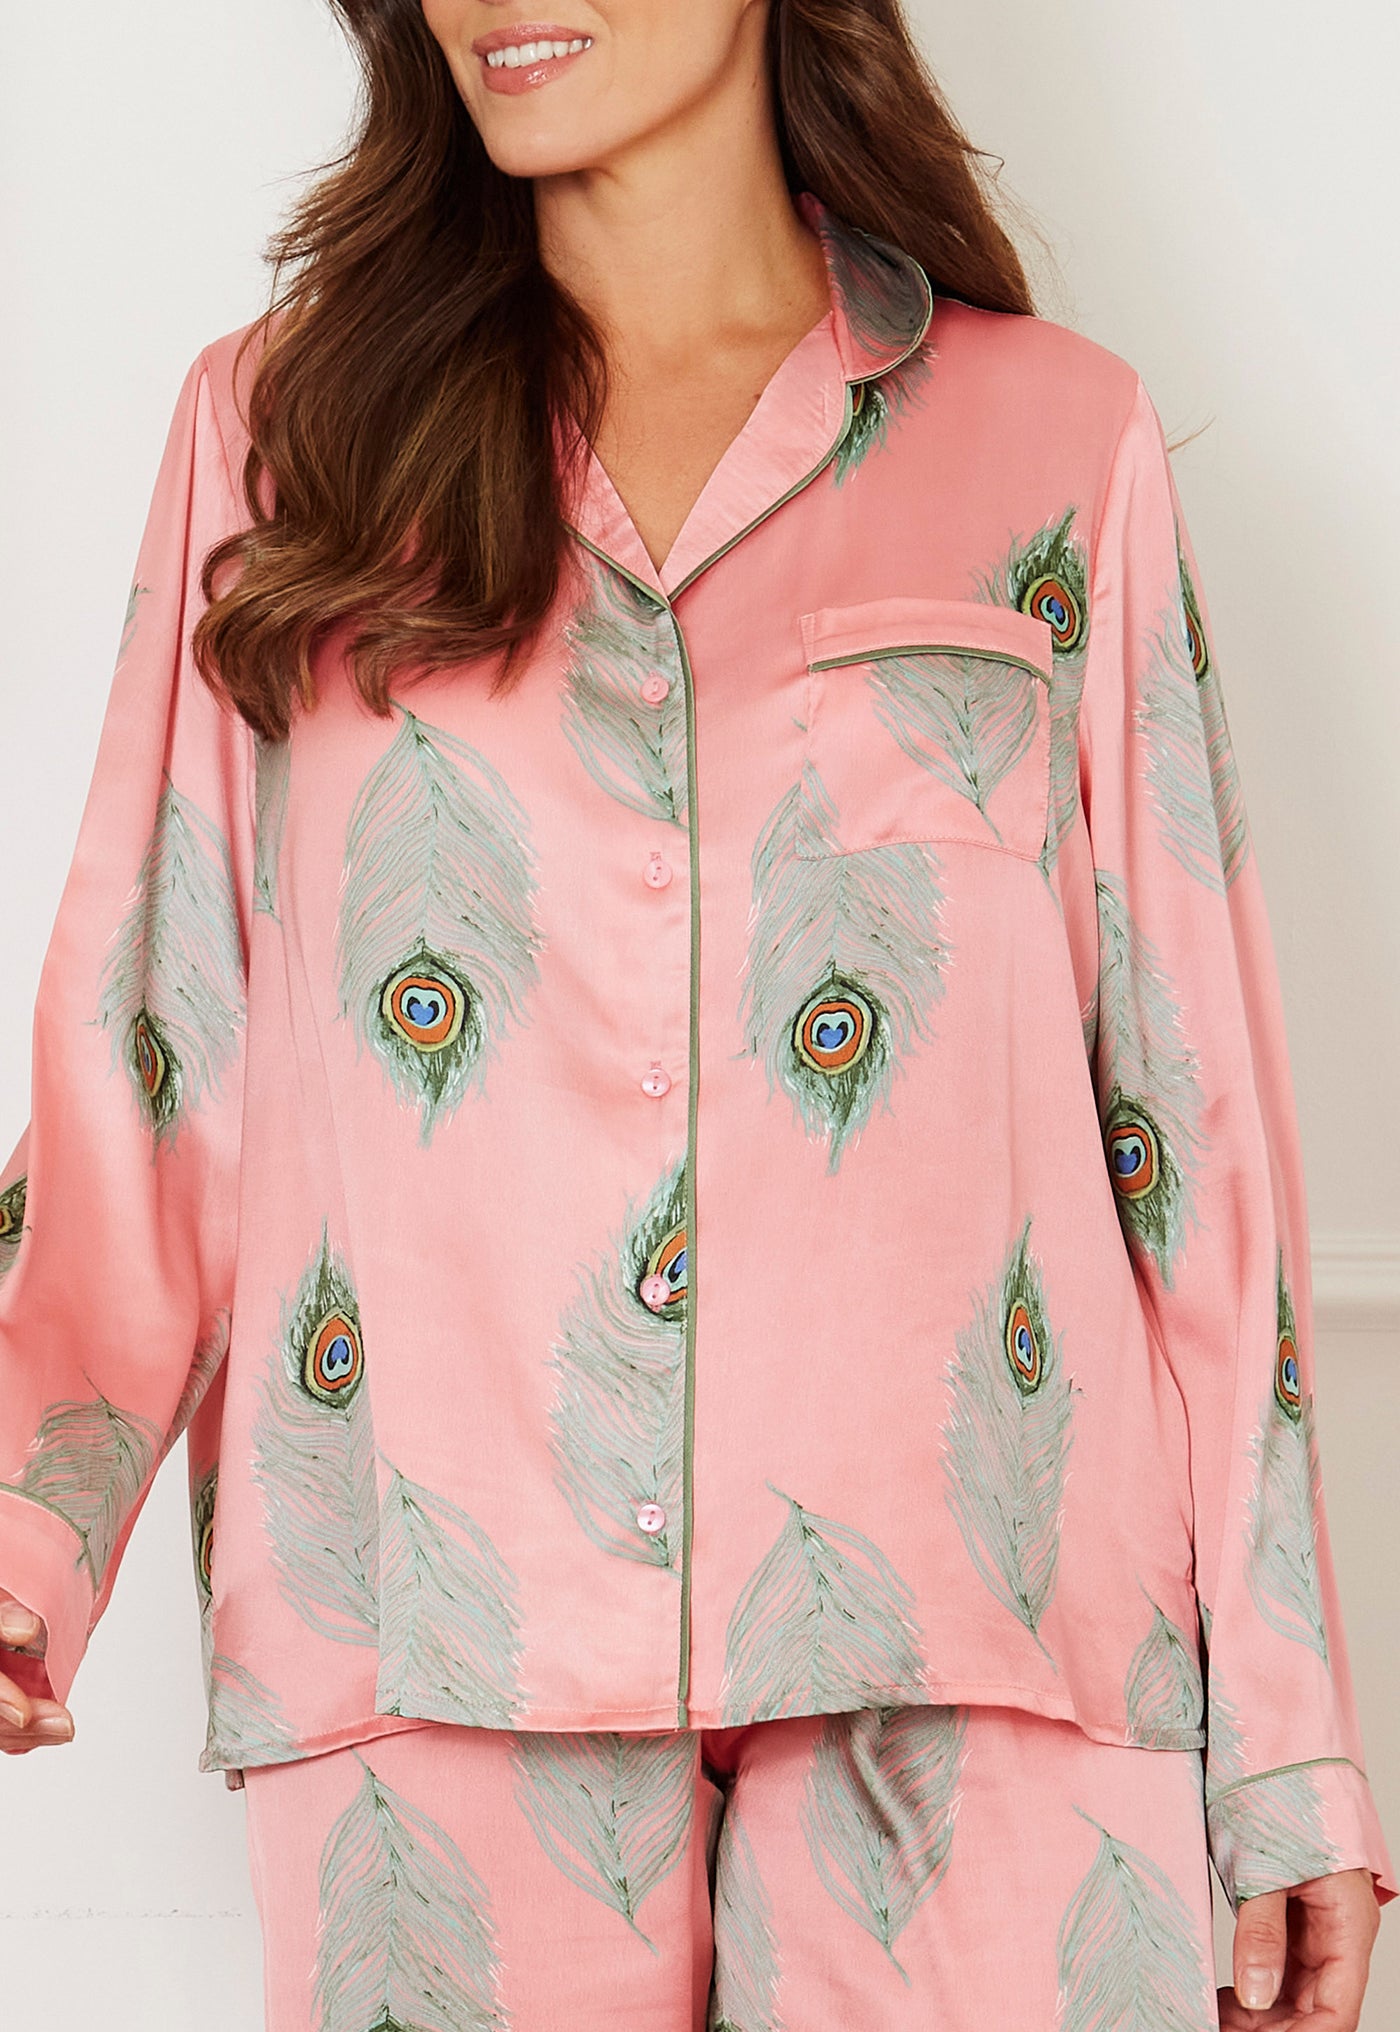 Womens Stand Alone Satin Pyjama Top, Warm Pink Peacock Feather